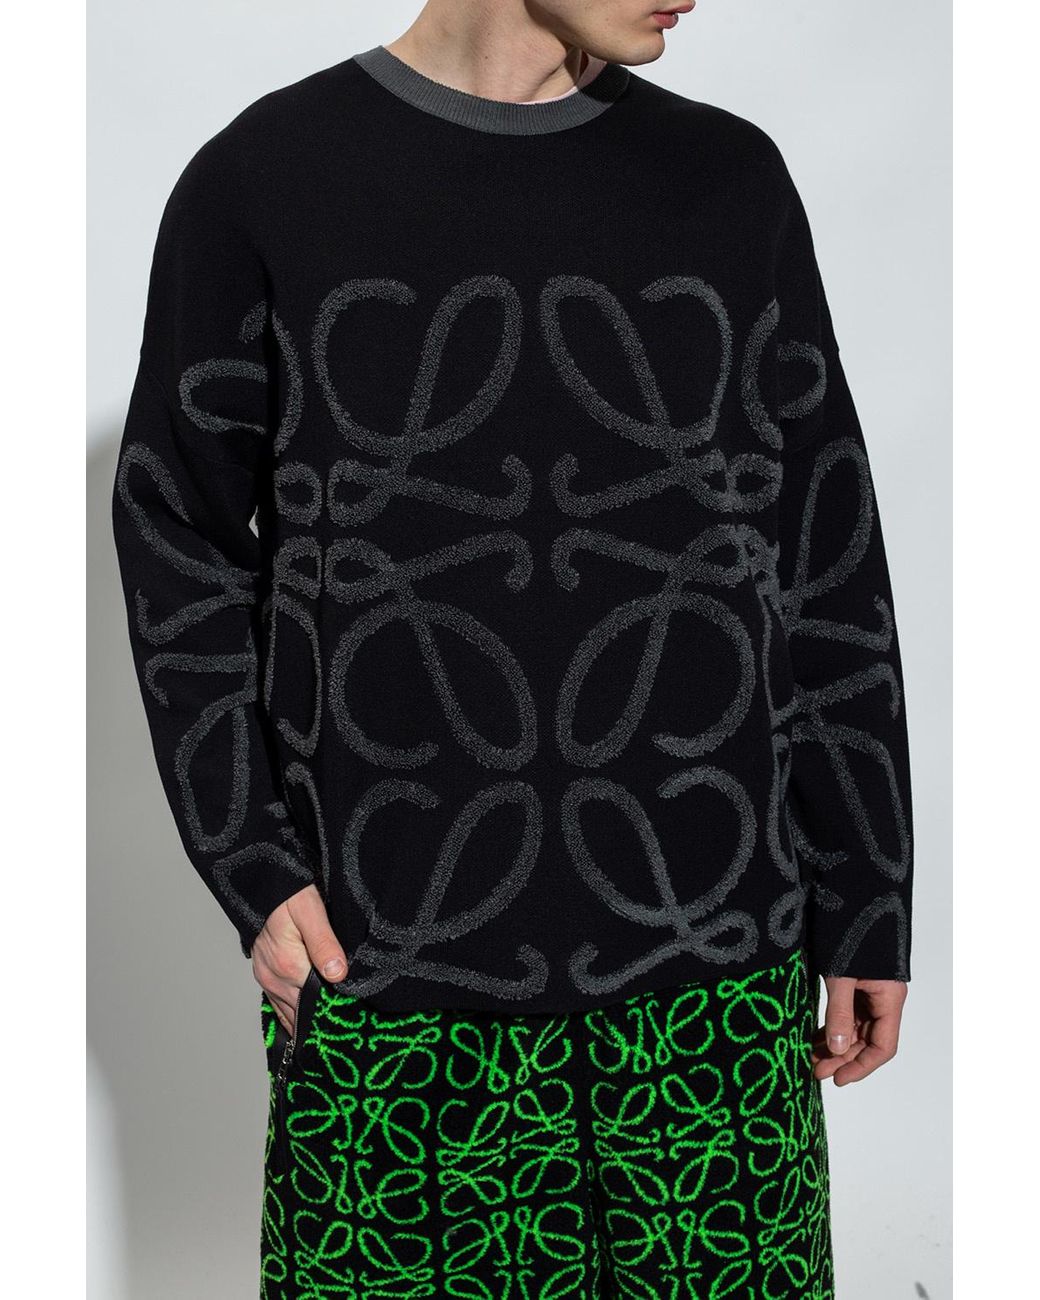 Loewe Sweater With Logo in Black for Men - Lyst